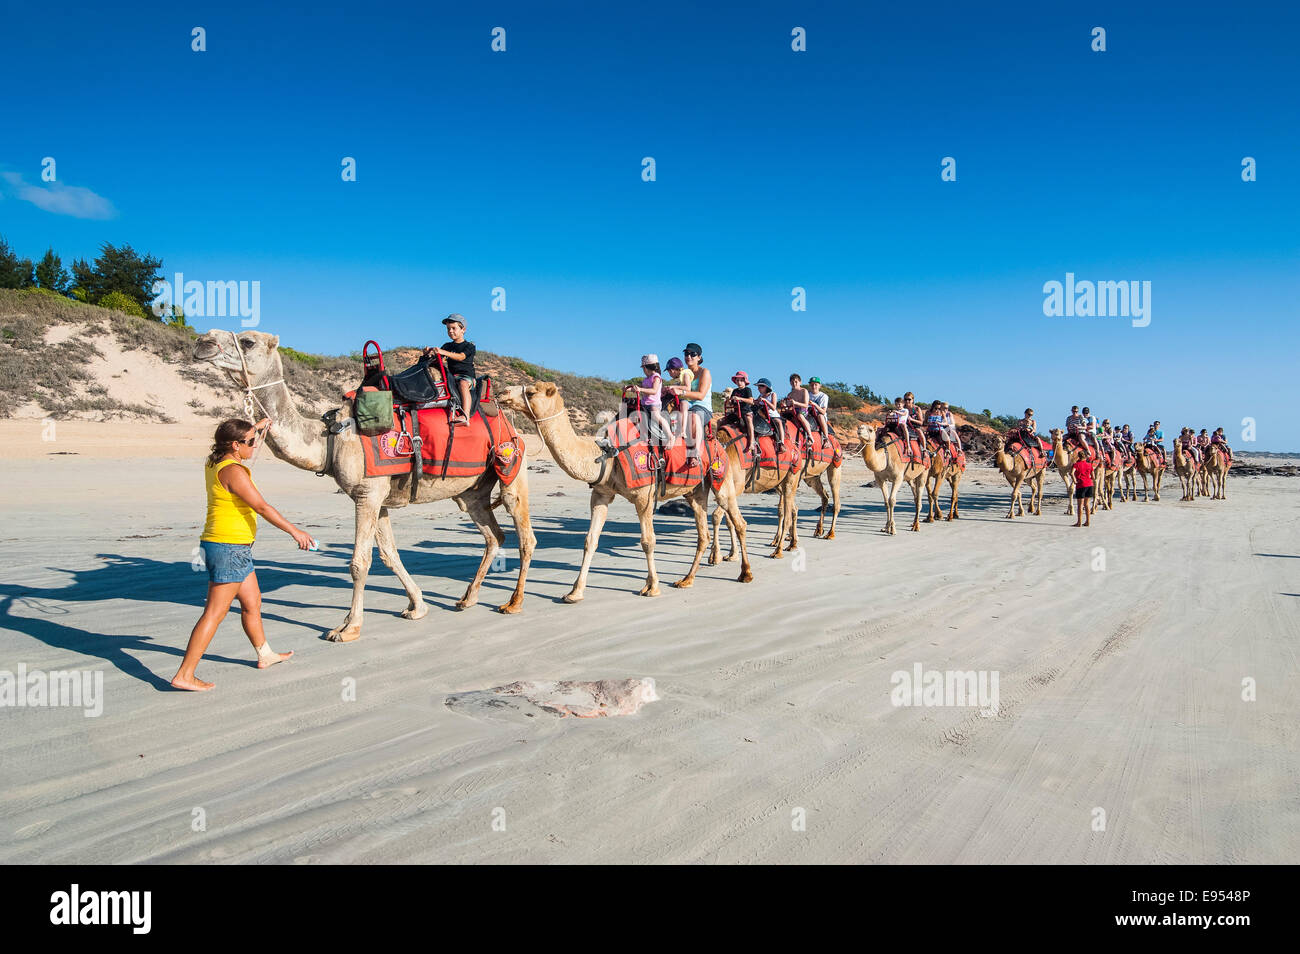 Tourists riding on camels on Cable Beach, Broome, Western Australia Stock Photo